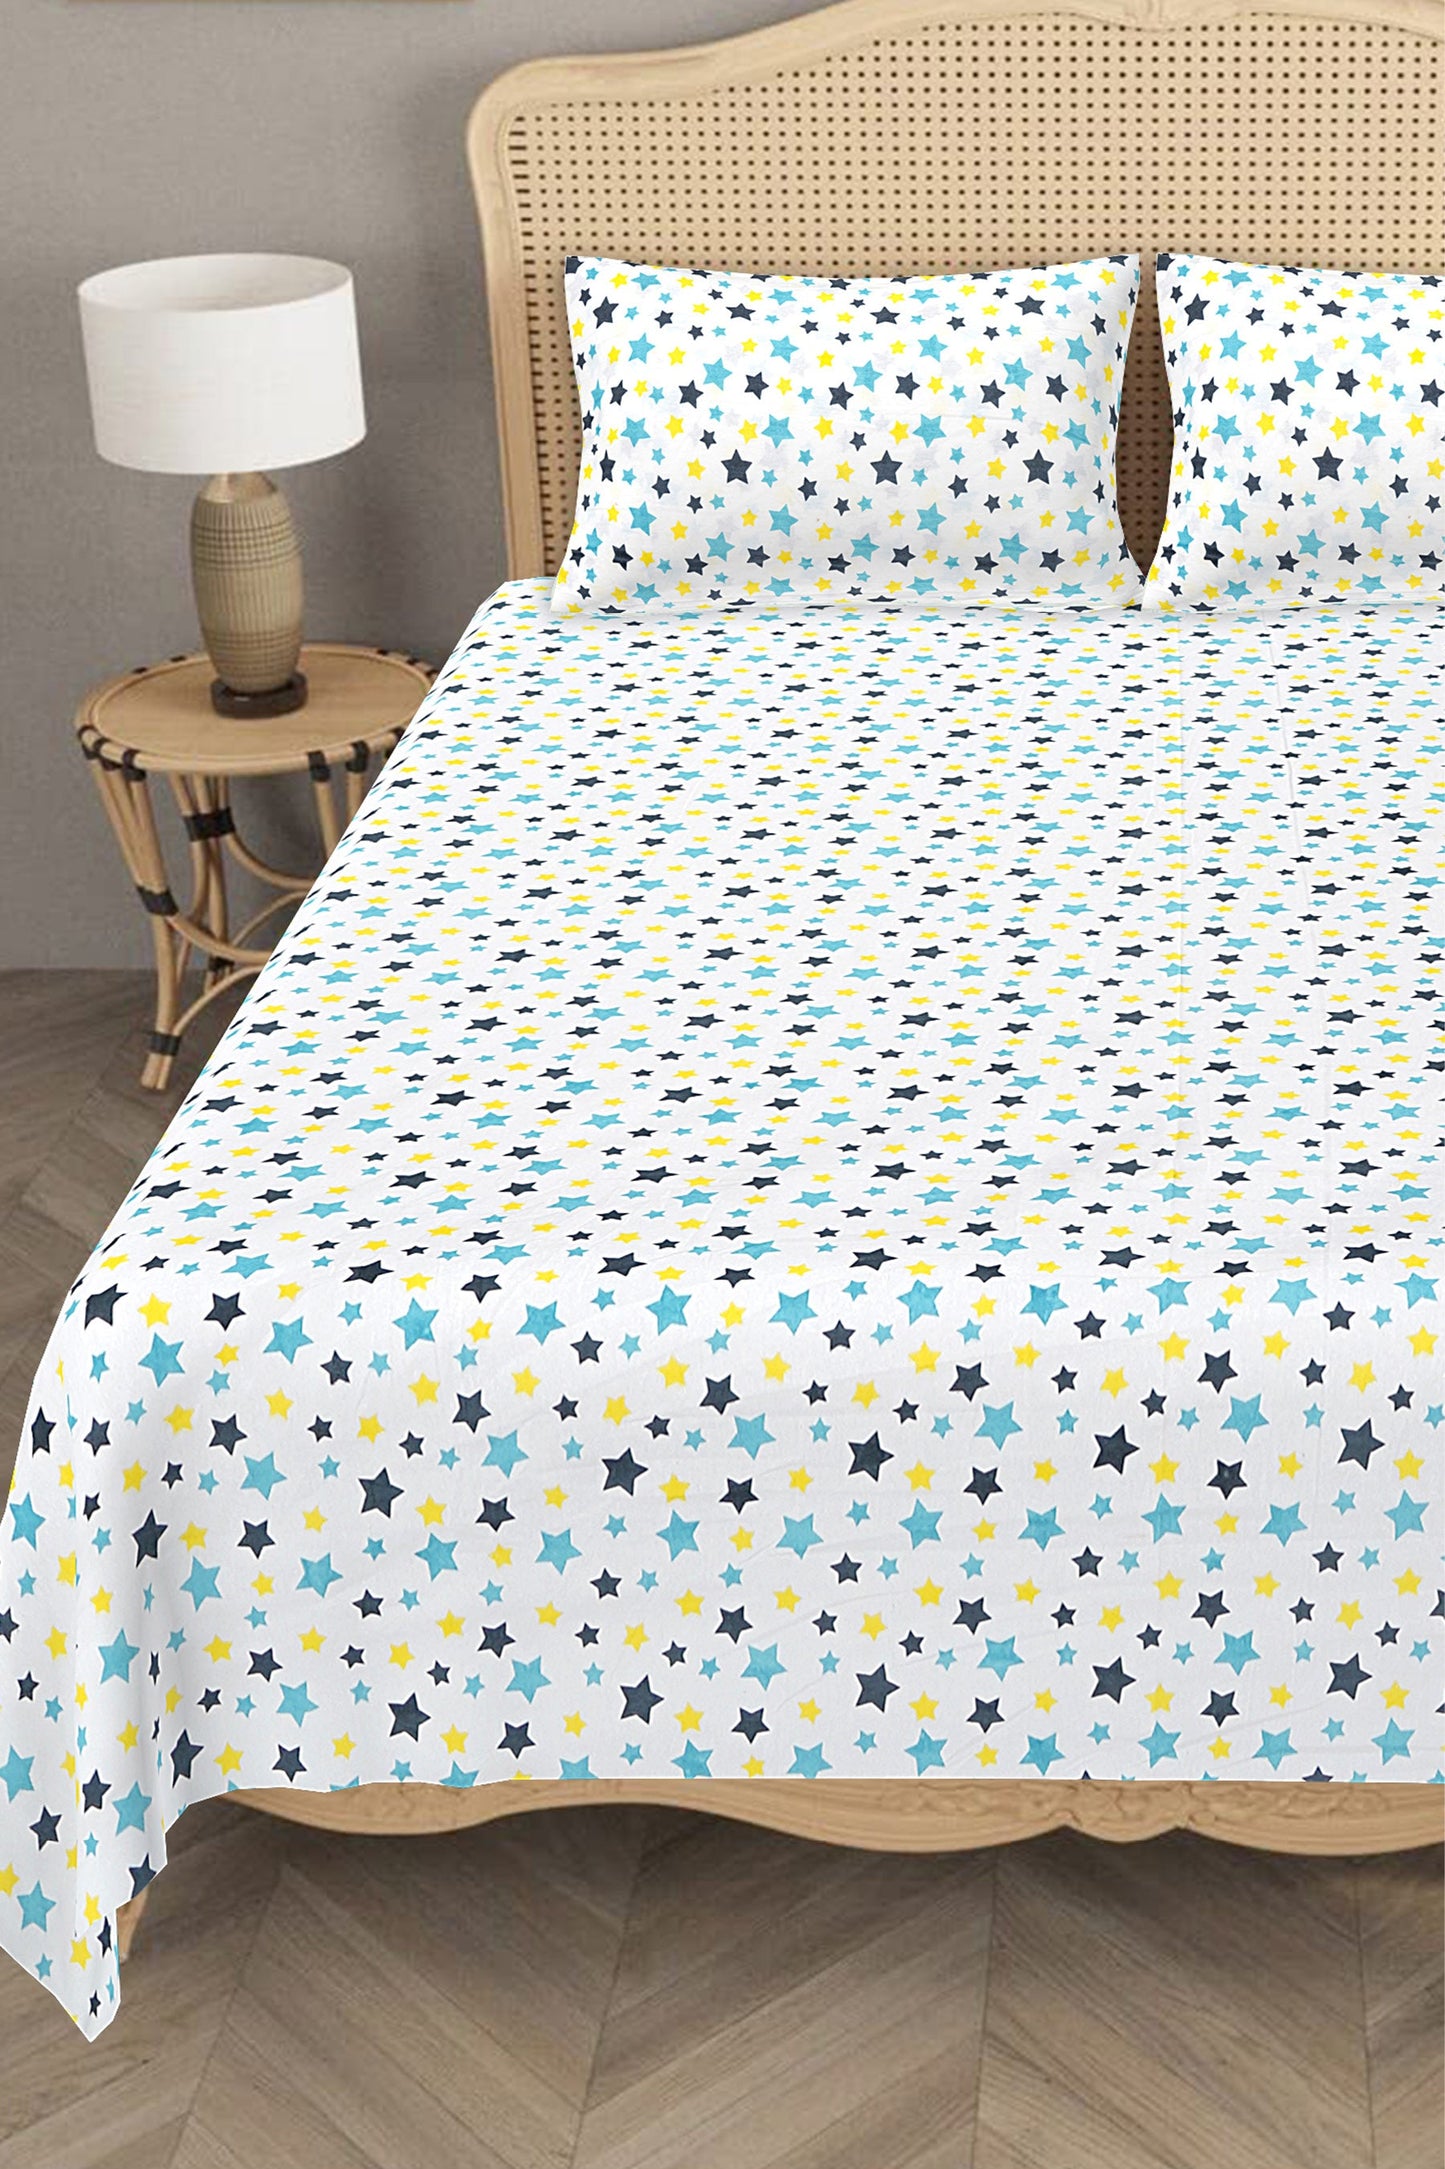 Kids Cotton Bedroom Linens - Double Sheet with 2 Pillow Covers in Black Star Print - King Size Bed